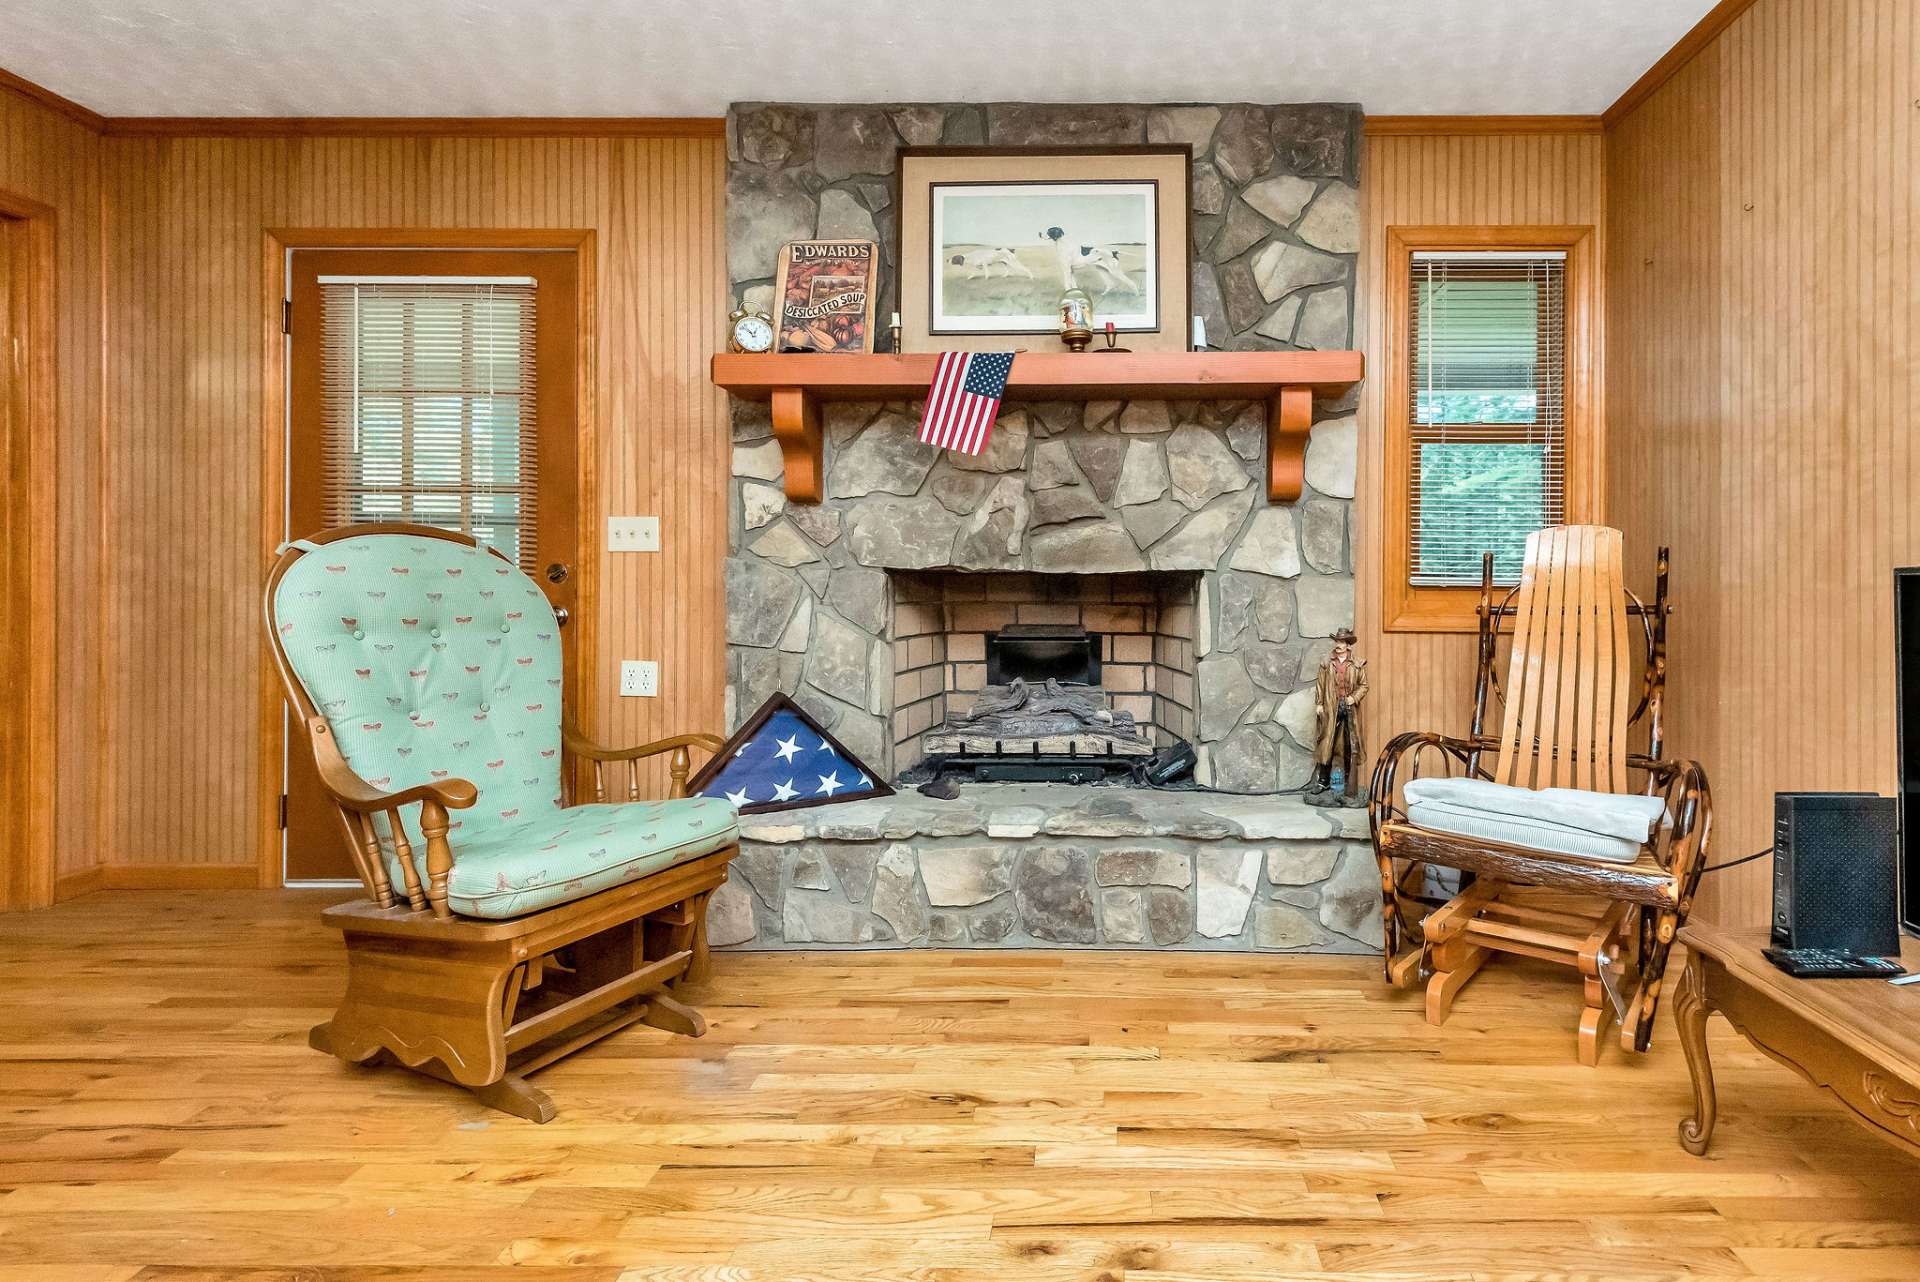 You will enjoy the warmth from the fireplace on those cool winter evenings in the mountains.